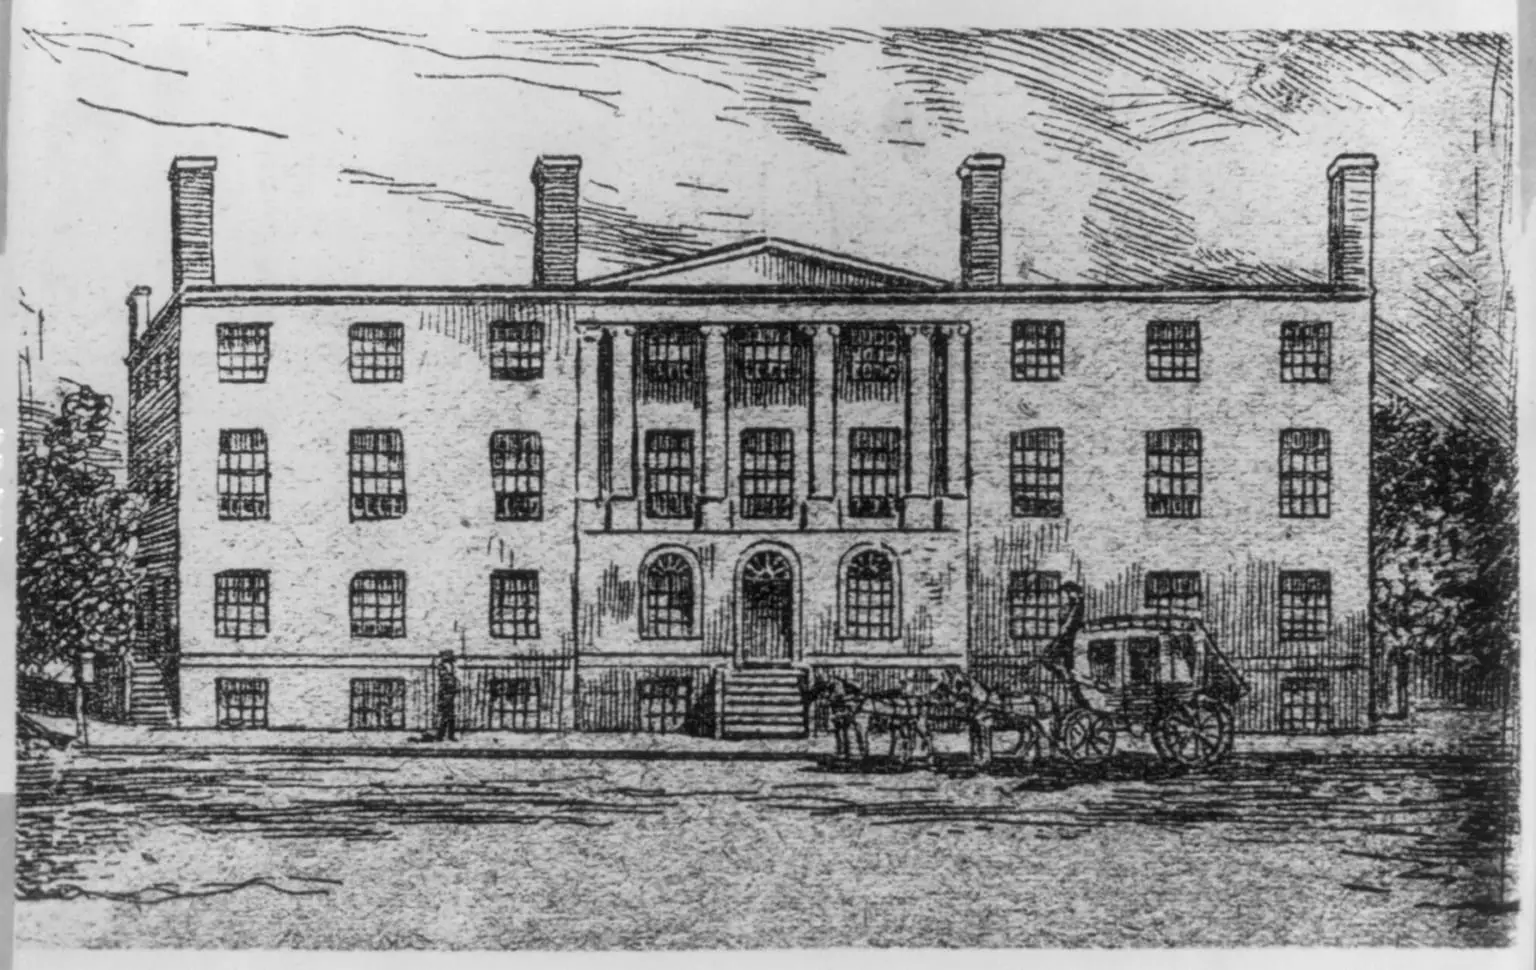 Print shows view from street of Blodget's Hotel with stagecoach parked in front and a person walking on the sidewalk on the left, later (from 1802 to 1836) the U.S. Patent Office.